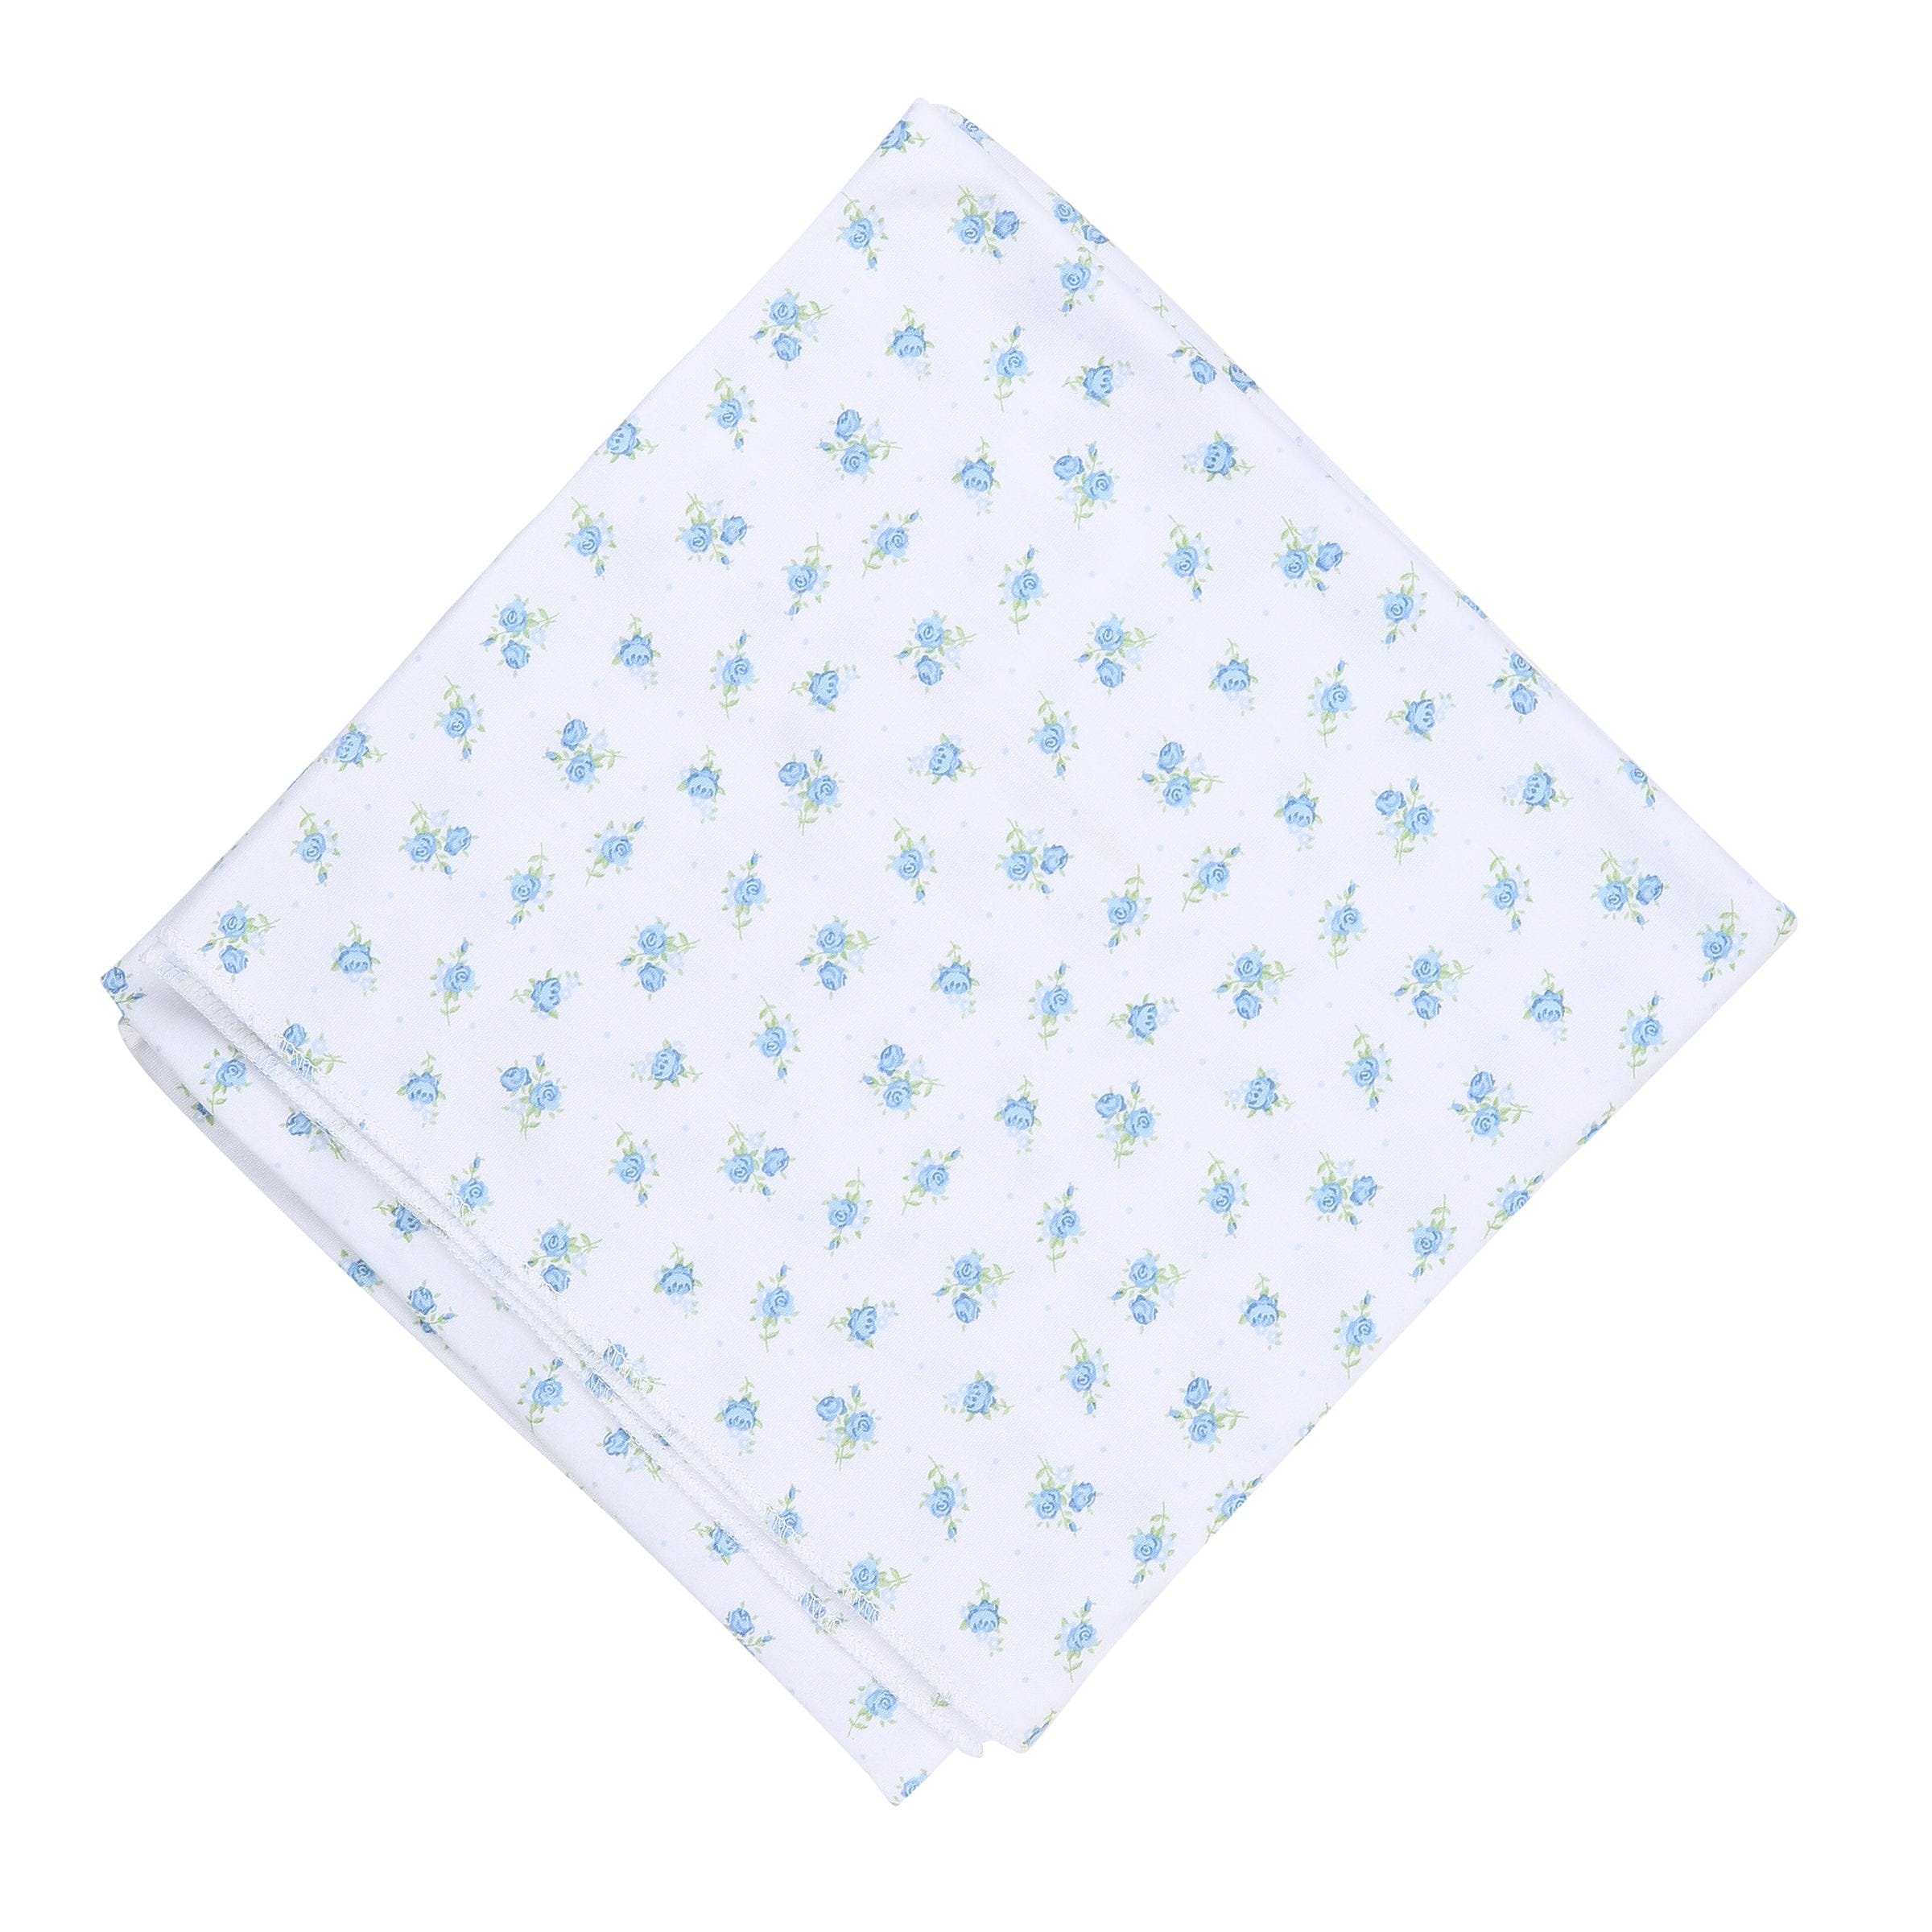 MAGNOLIA BABY - Anna’s Swaddle Blanket - Blue